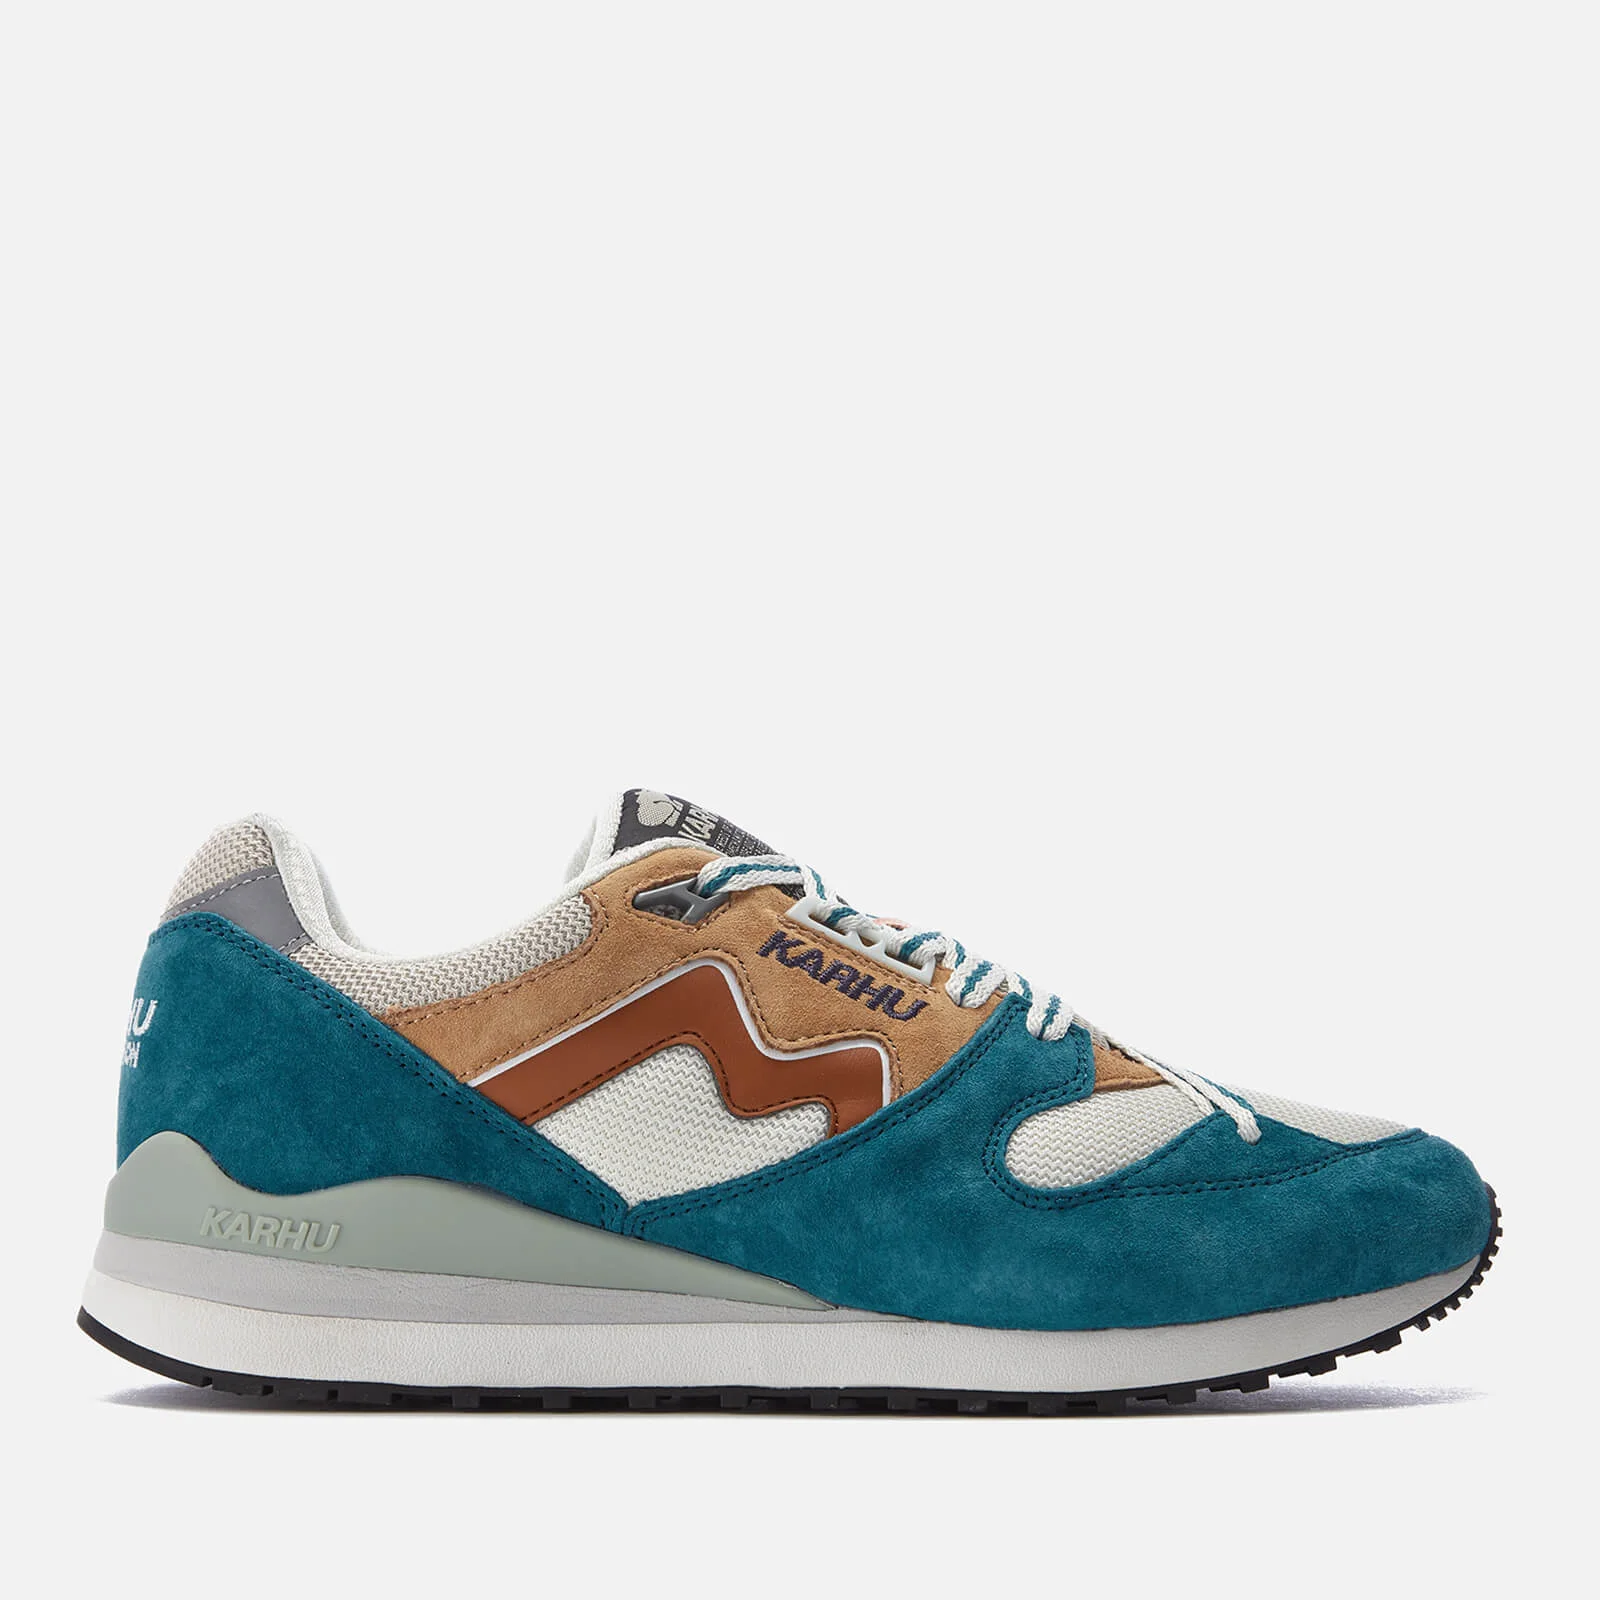 Karhu Men's Synchron Classic Trainers - Blue Coral/Glazed Ginger Image 1